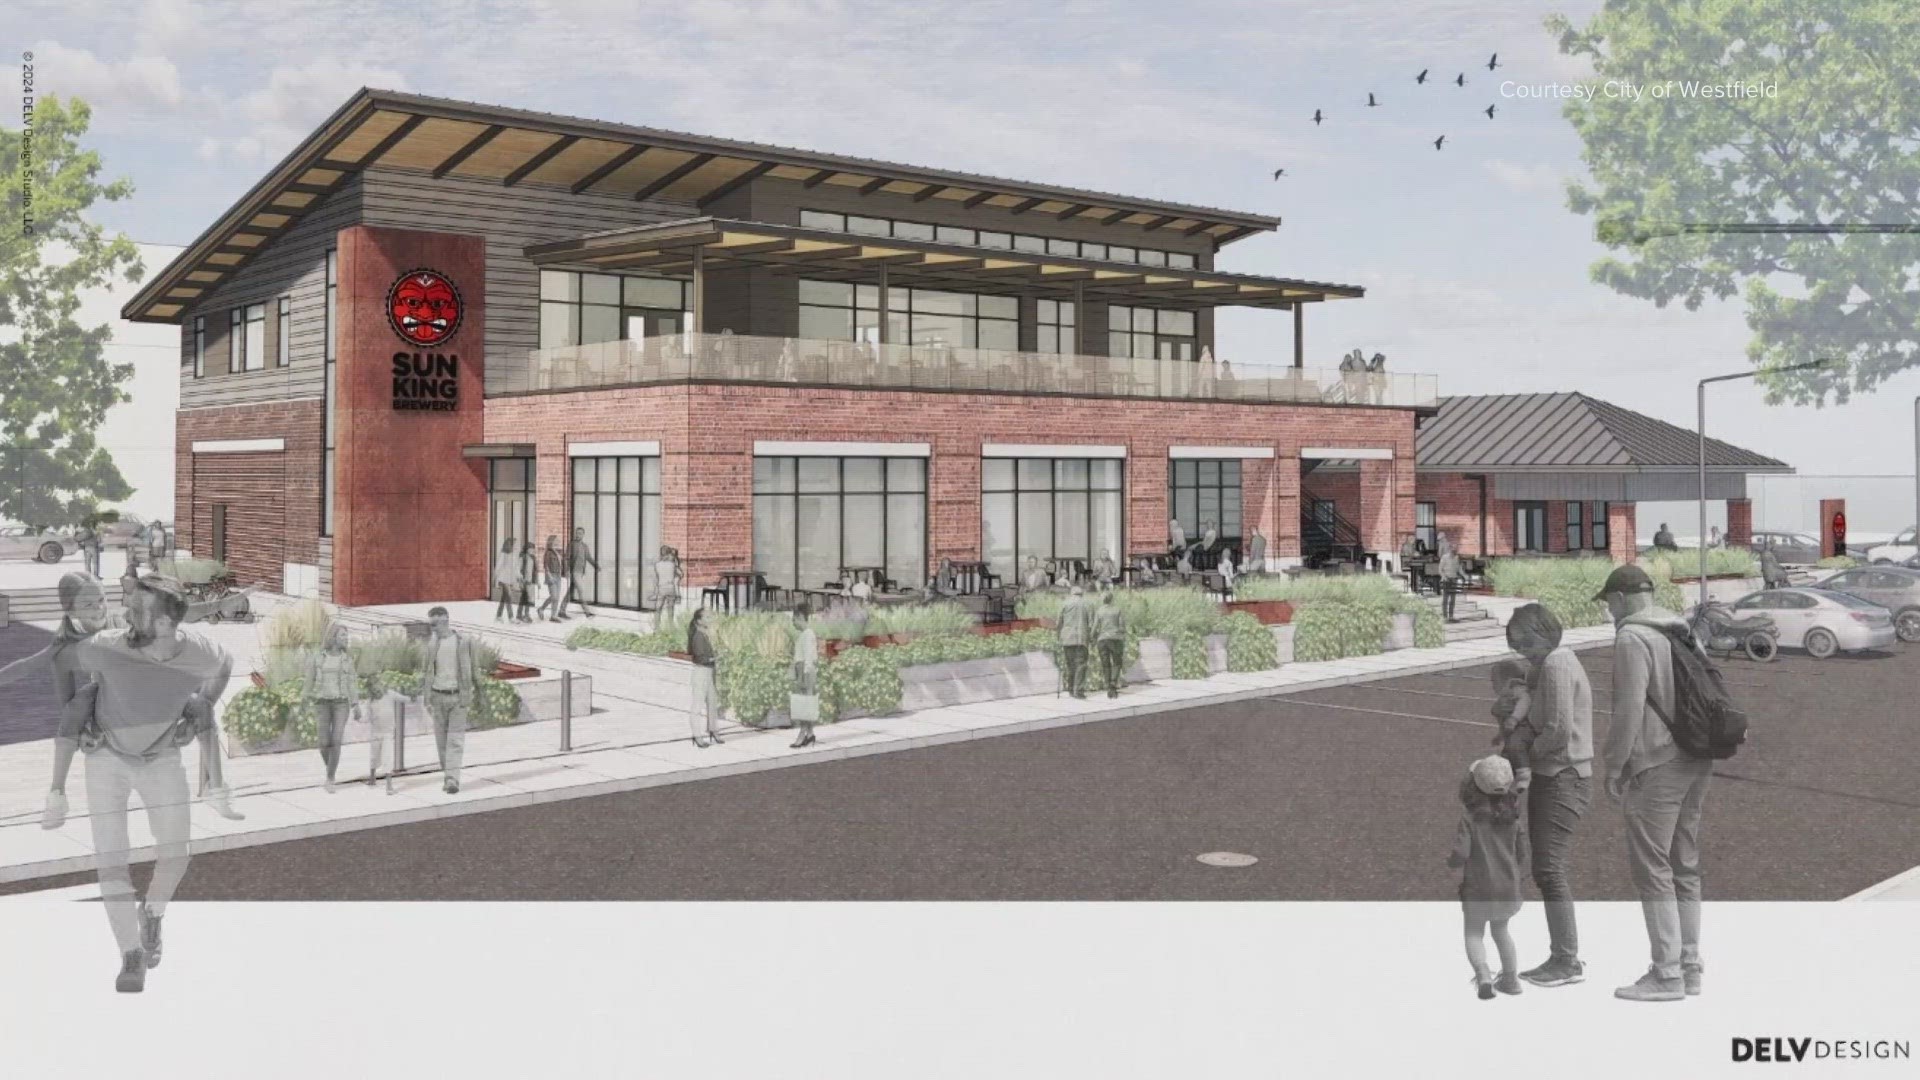 The brewery will be the first tenant in the town's newest community development building at State Road 32 and Union Street.